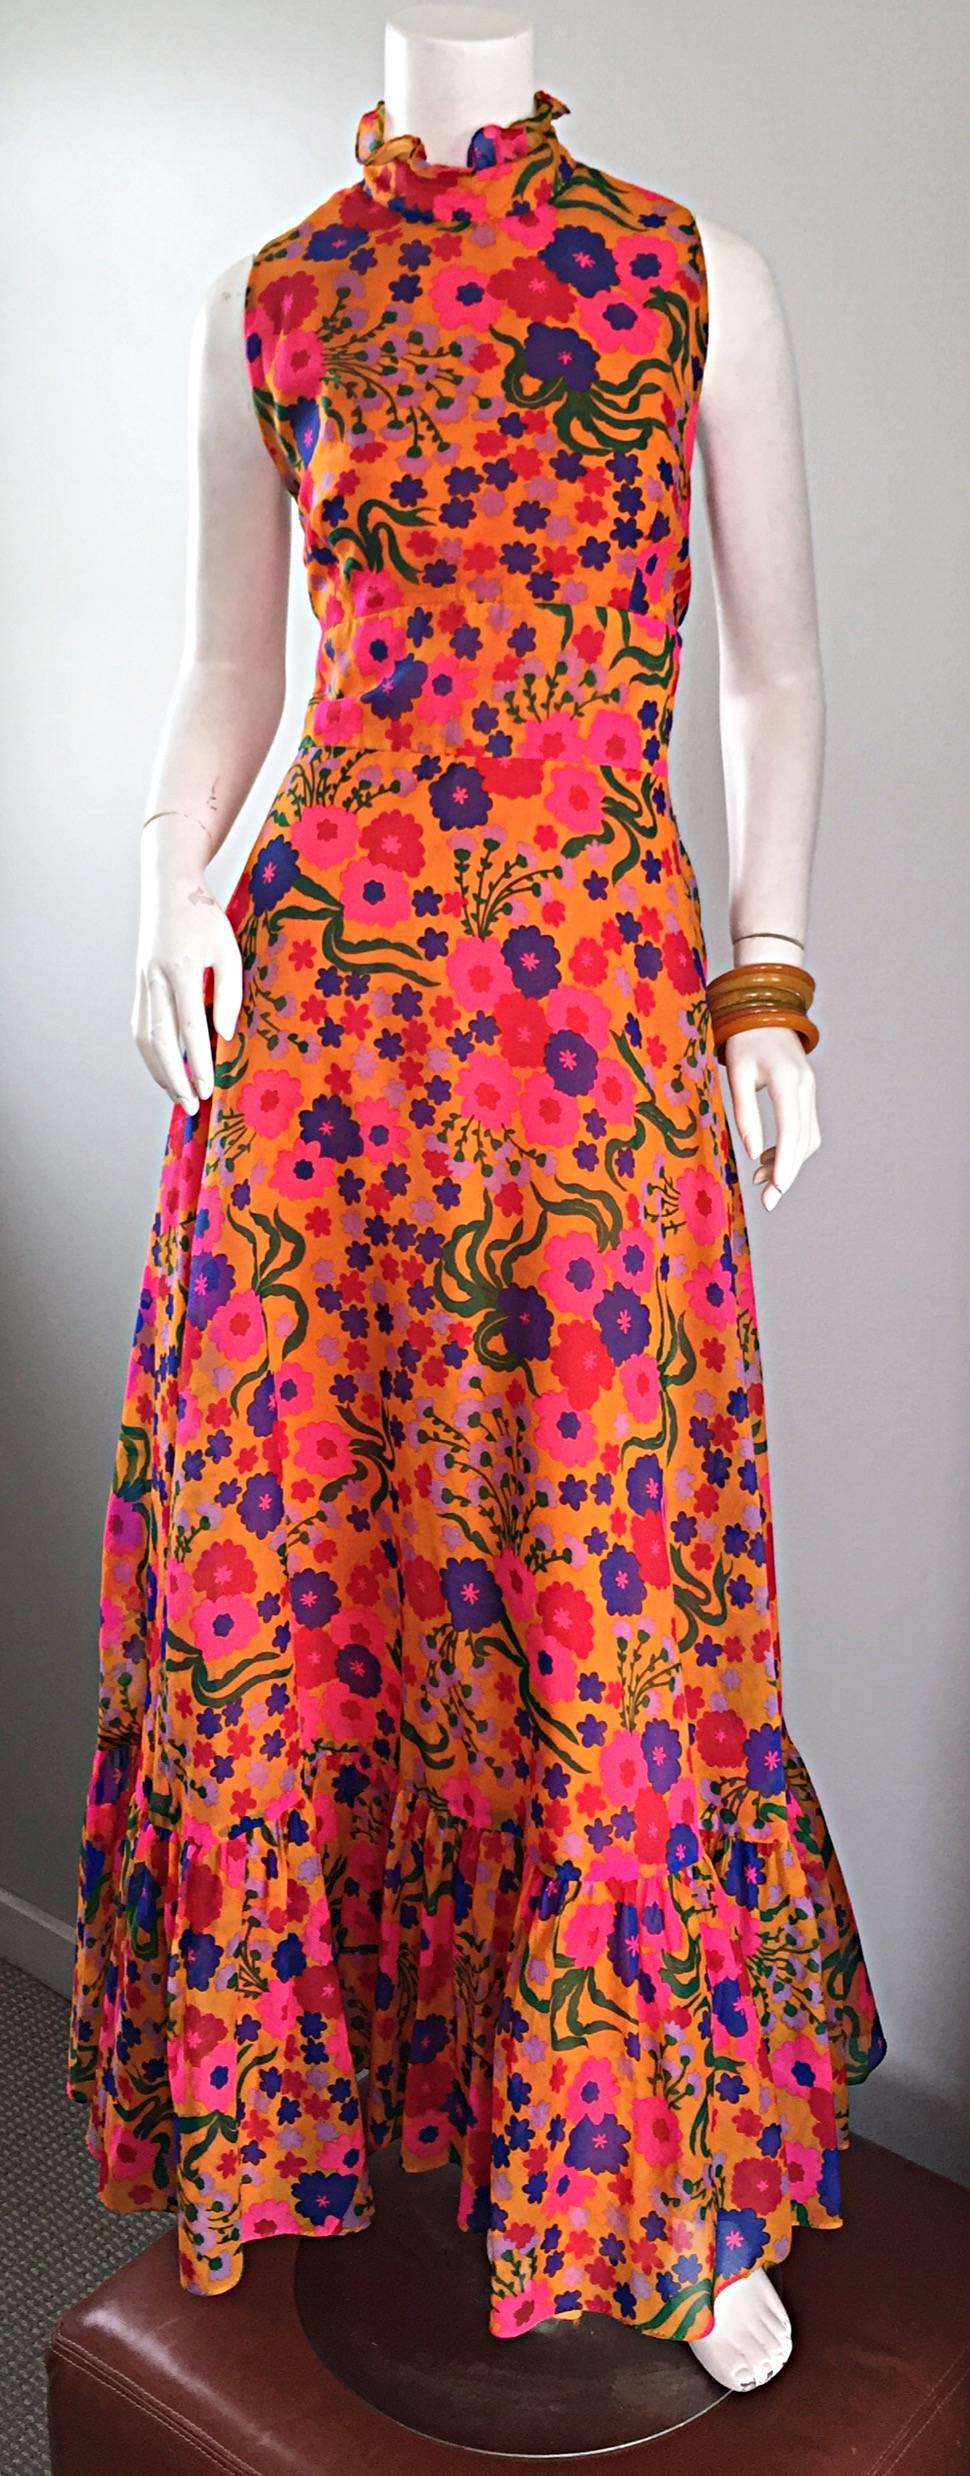 Amazing 70s colorful psychedelic chiffon maxi dress! Features a vibrant floral print in orange, pink, blue, green, red and purple! Chic ruffled neck, and ruffle hem. Peek-a-boo back with buttons at top back neck. Full metal zipper up the back.